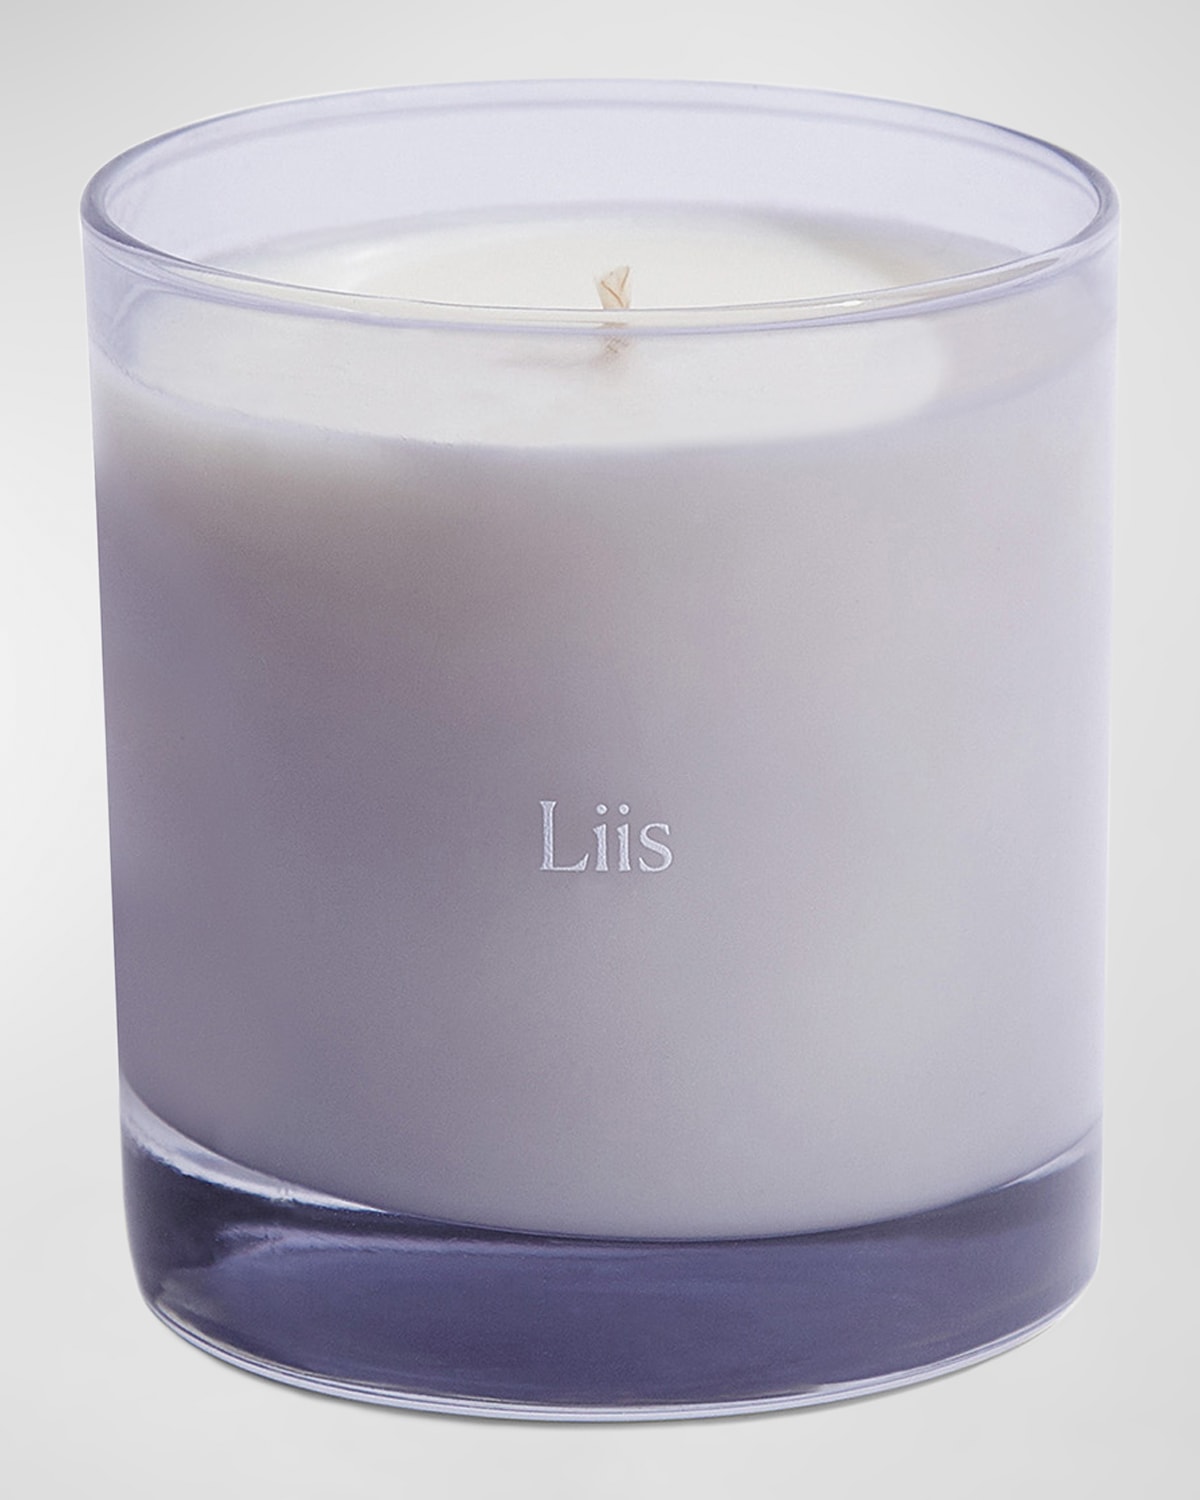 Liis Snow On Fire Perfumed Candle, 8 Oz. In Purple